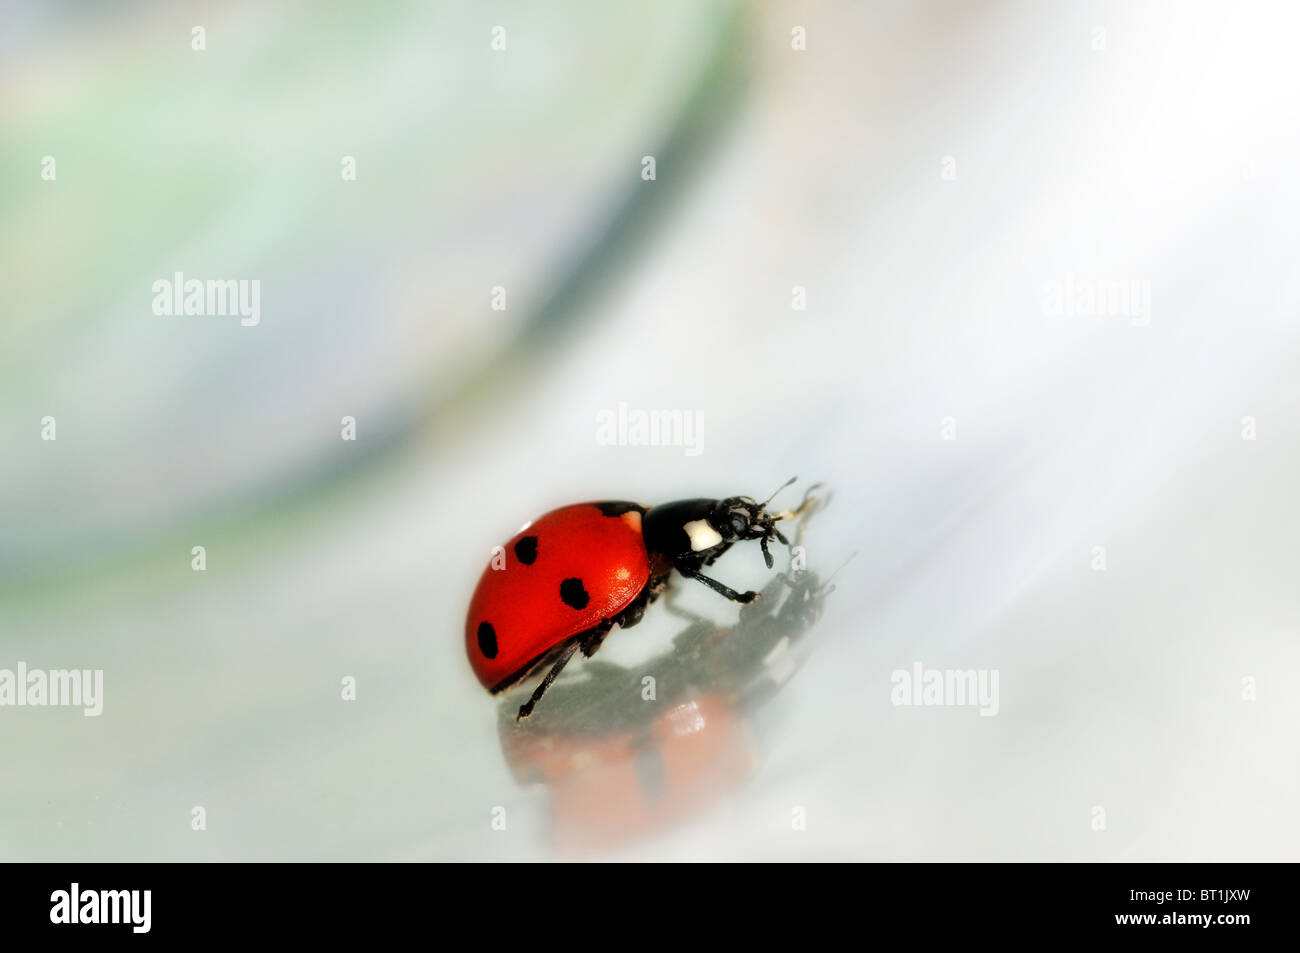 Lady bird bug moving on conceptual grey abstract background. Stock Photo